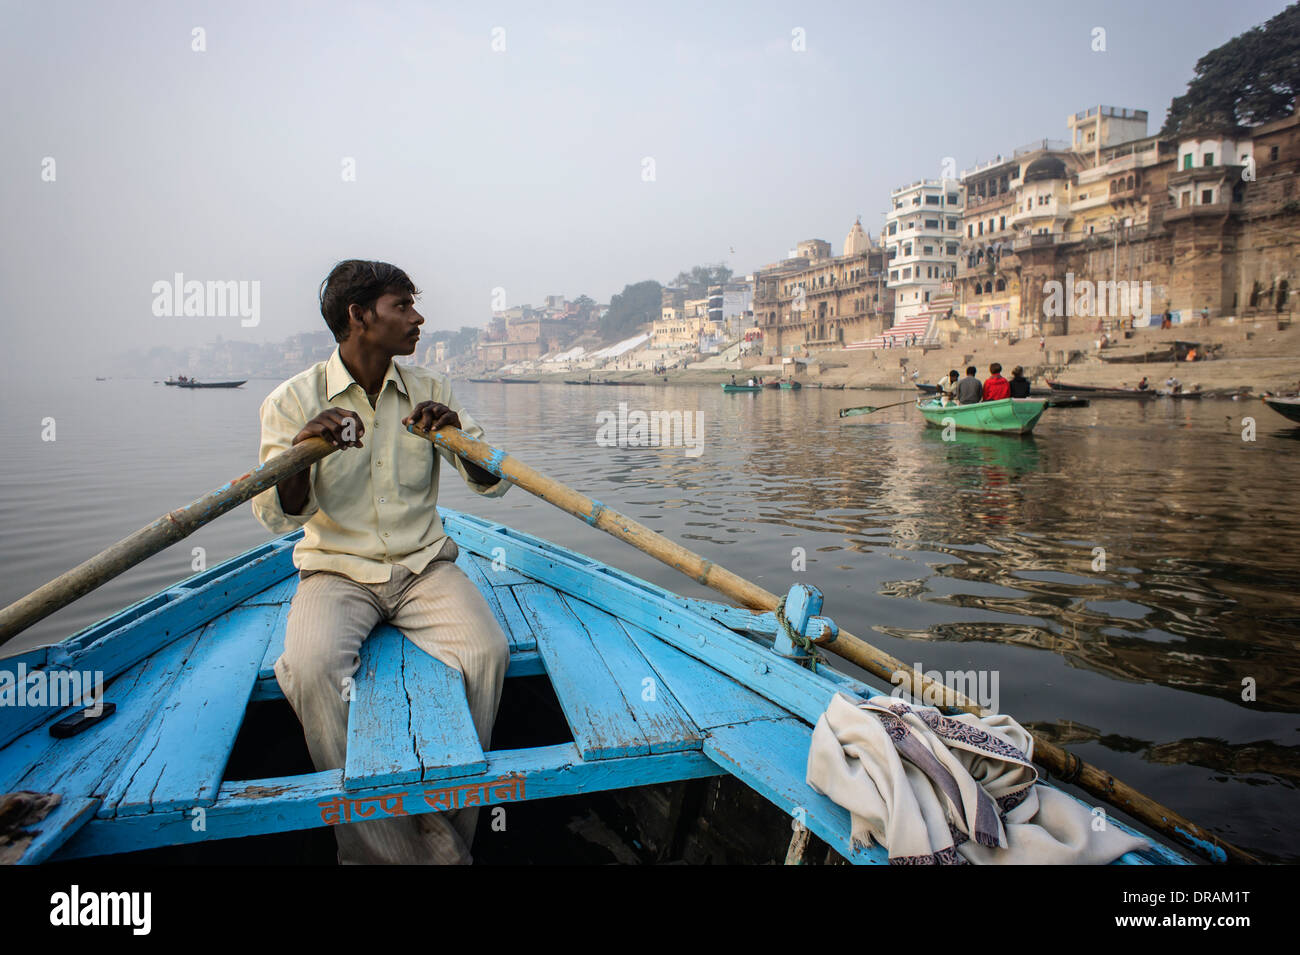 Man rowing boat on the Ganges River Stock Photo